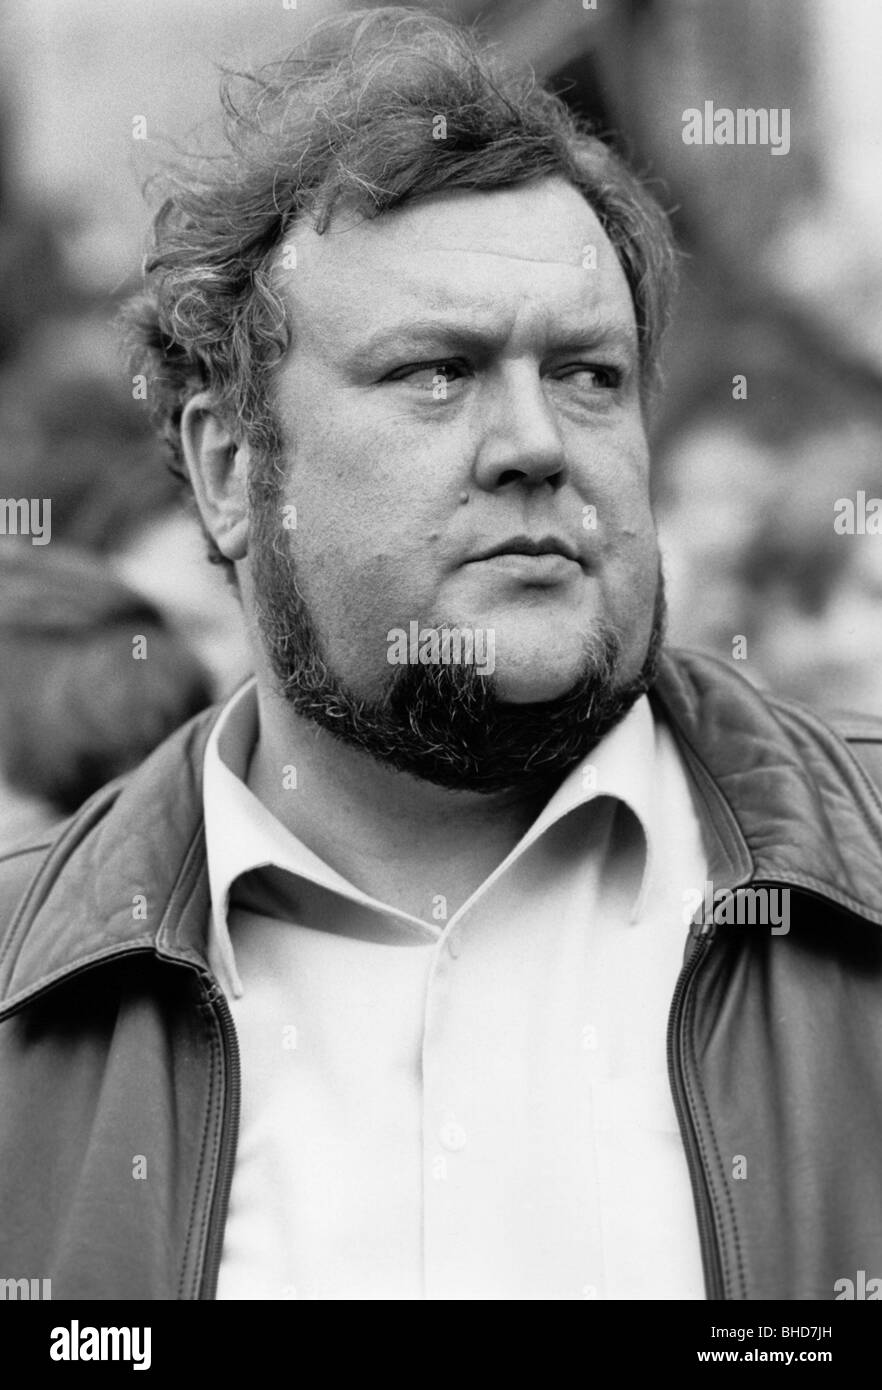 Hiersemann, Karl-Heinz, 17.8.1944 - 15.7.1998, German politician (SPD), portrait, Easter March in Wackersdorf against the nuclear reprocessing plant, Germany, 31.3.1986, Stock Photo